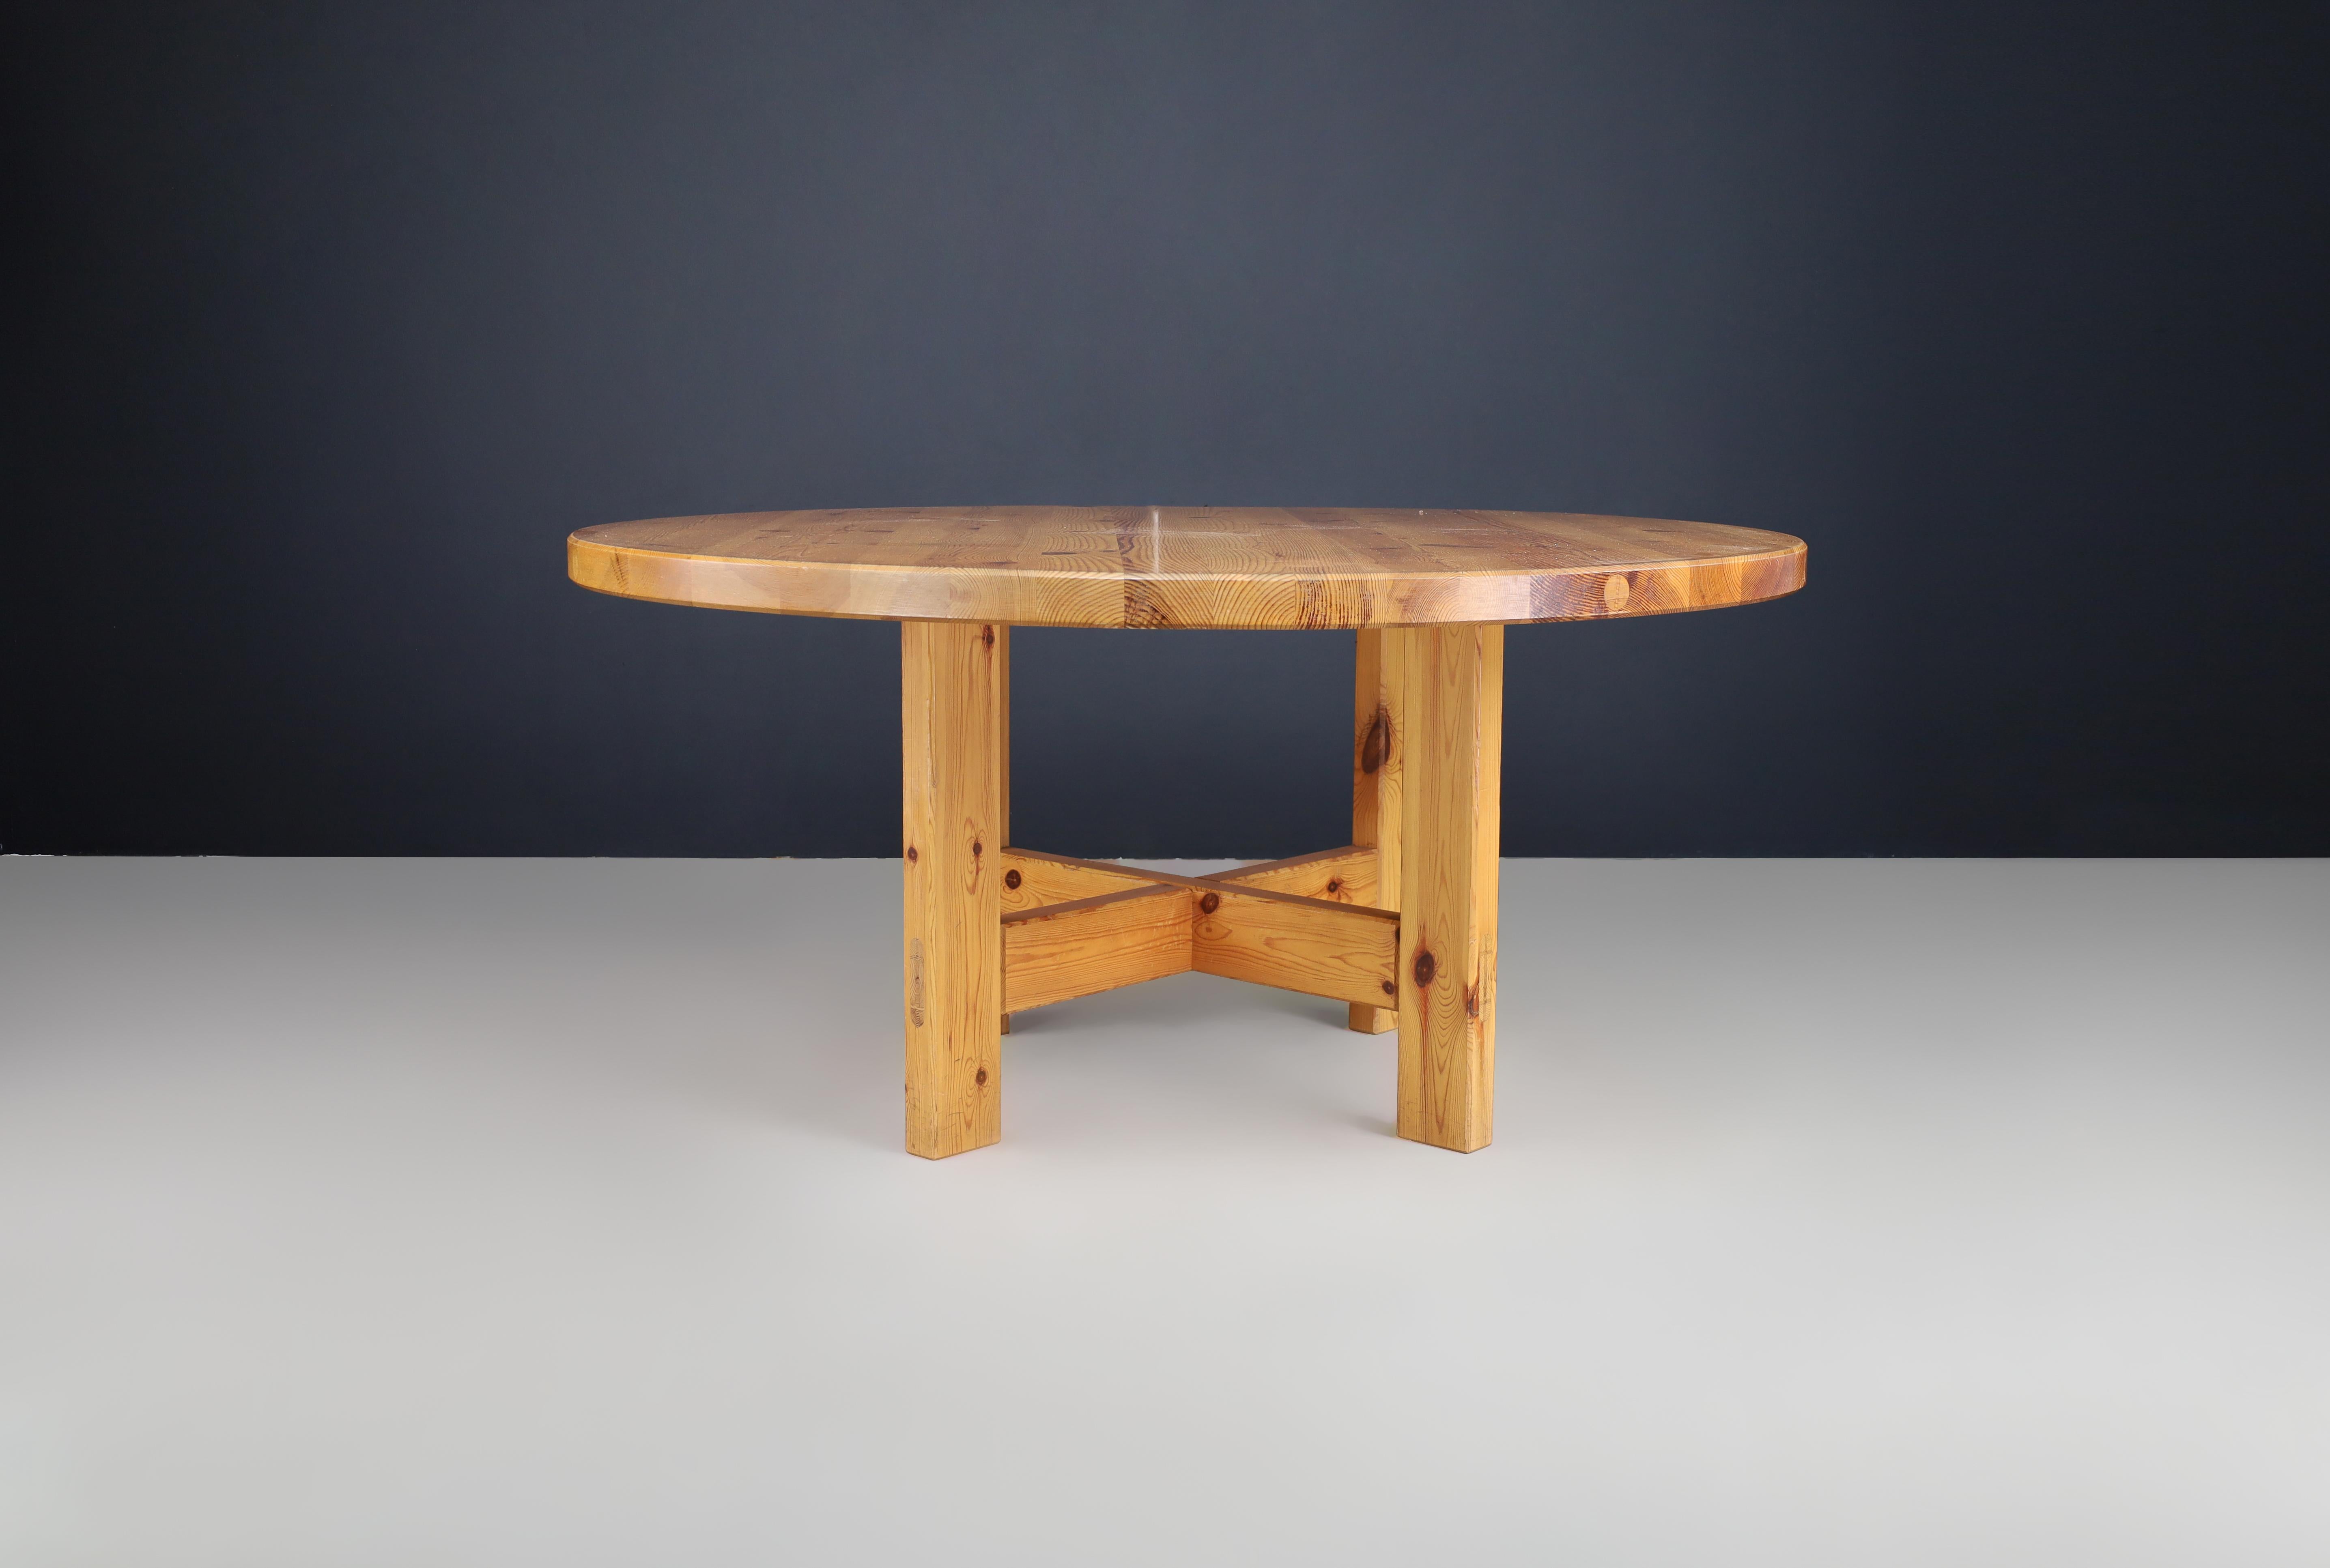 Roland Wilhelmsson for Karl Andersson & Söner Large Round Solid Pine Table Sweden 1970.

This is a massive Swedish pine dining table designed by Roland Wilhelmsson for Karl Andersson & Söner in the 1970s. The table has a round top ( dia 150 cm ) and